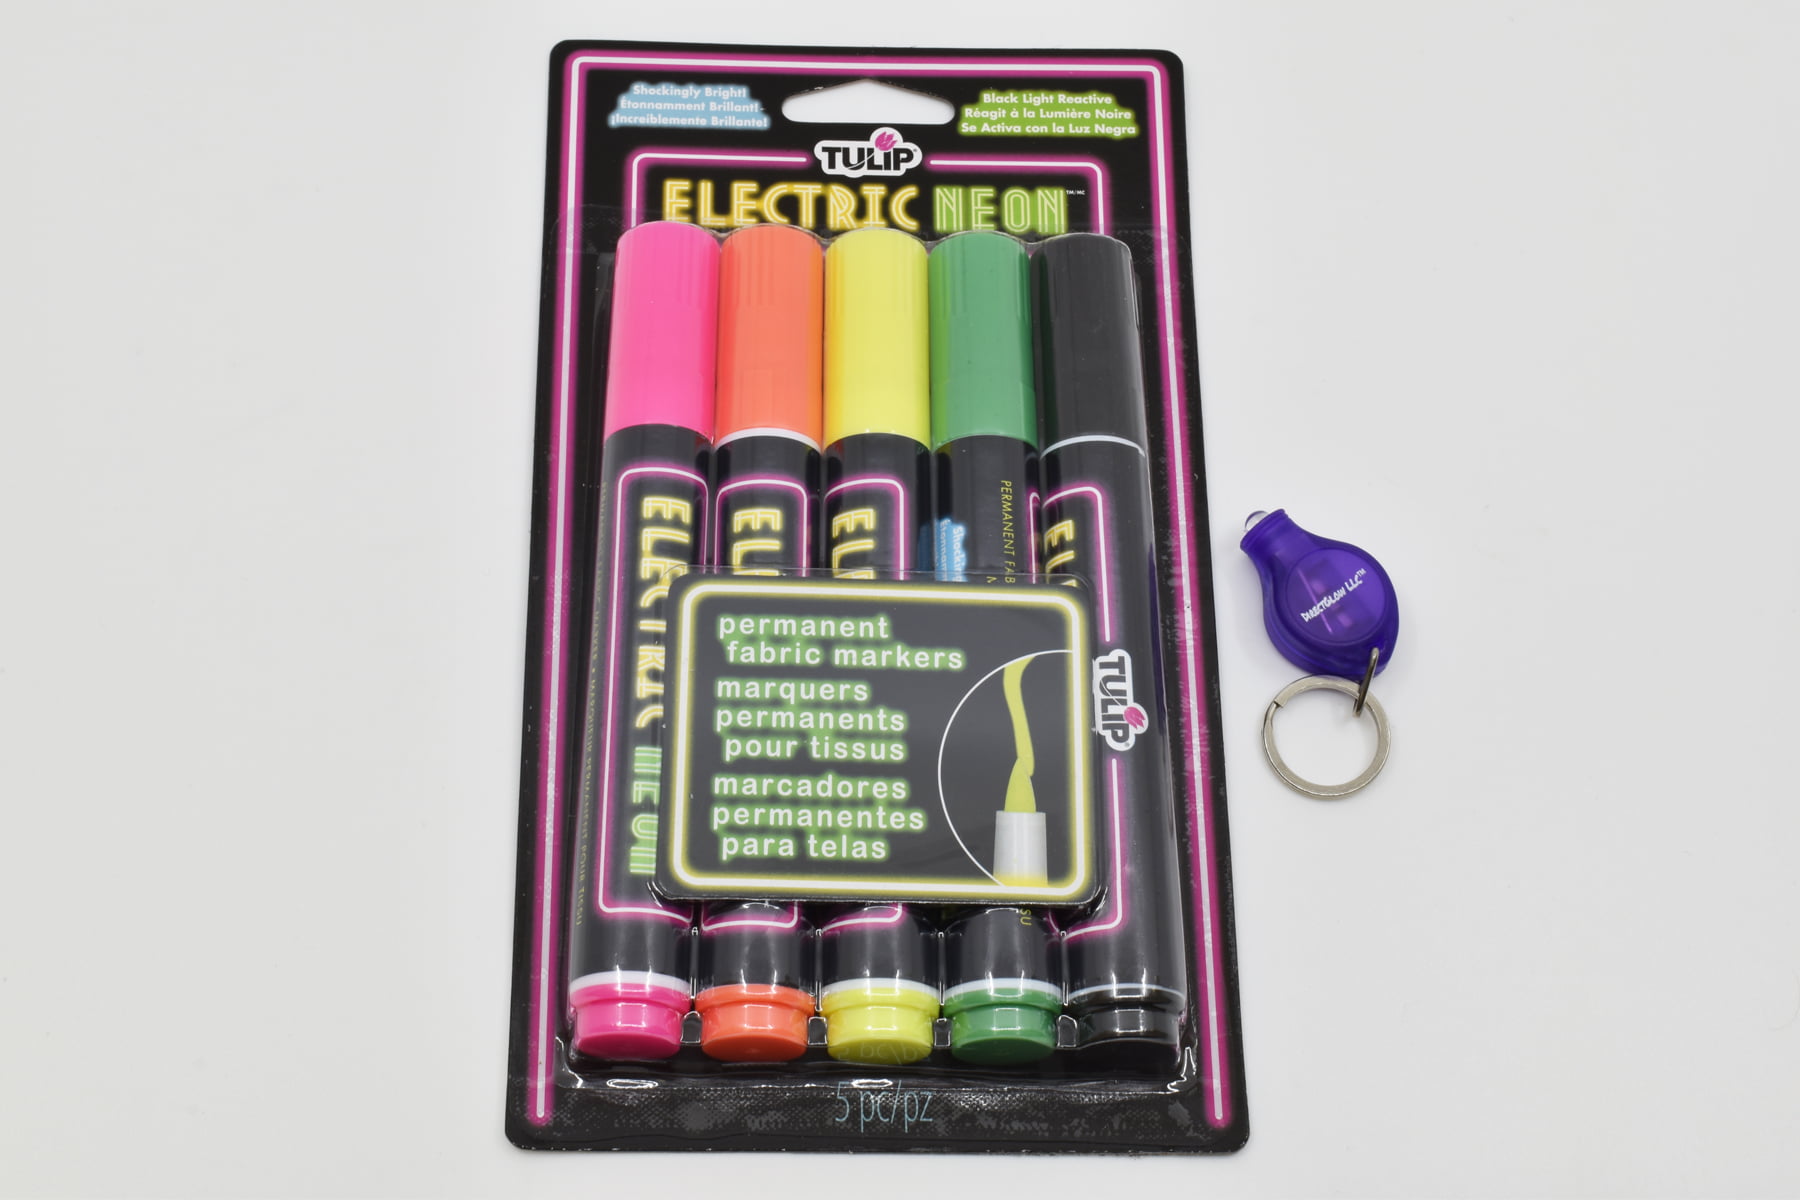 Blacklight Reactive Electric Neon Permanent Fabric Markers 5 Pack with  DirectGlow Keychain Flashlight